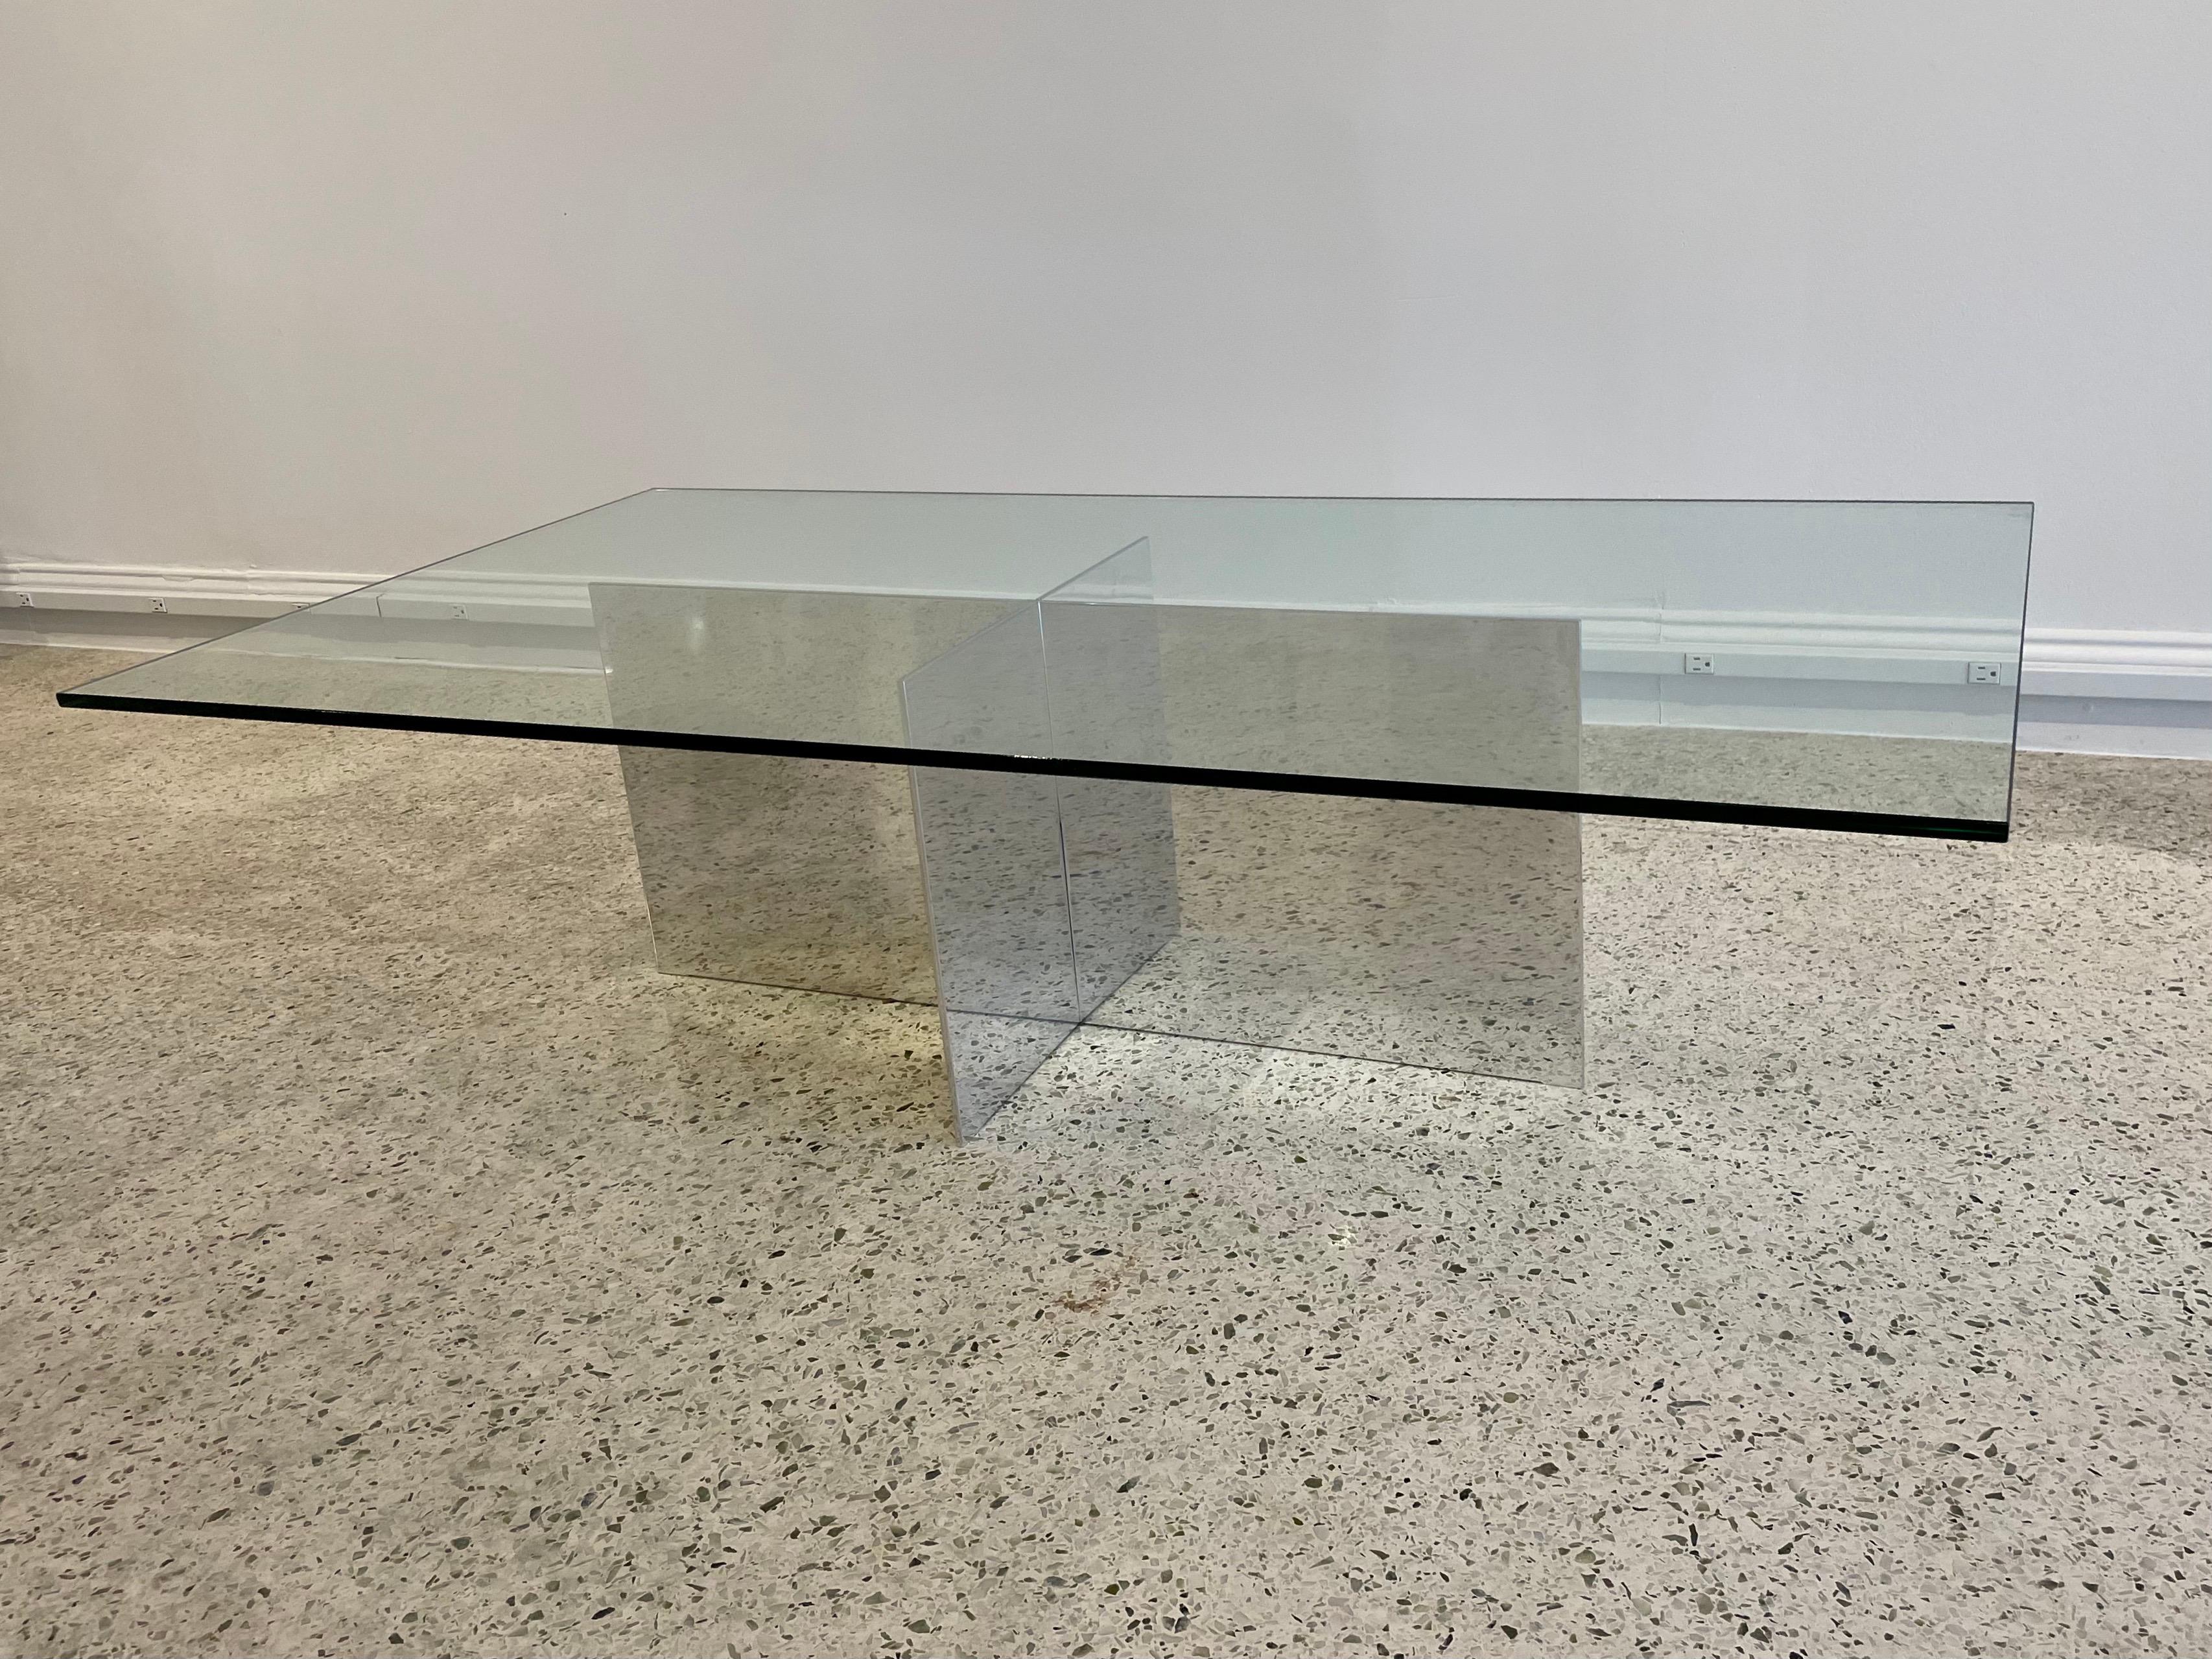 This rectangular cocktail table was designed and created by Paul Mayen for Habitat in the 1970s. It is fabricated out of polished aluminum and has a NEW glass top.

Paul Mayen was a founder of Habitat, Intrex and Architectural Supplements, Inc. He